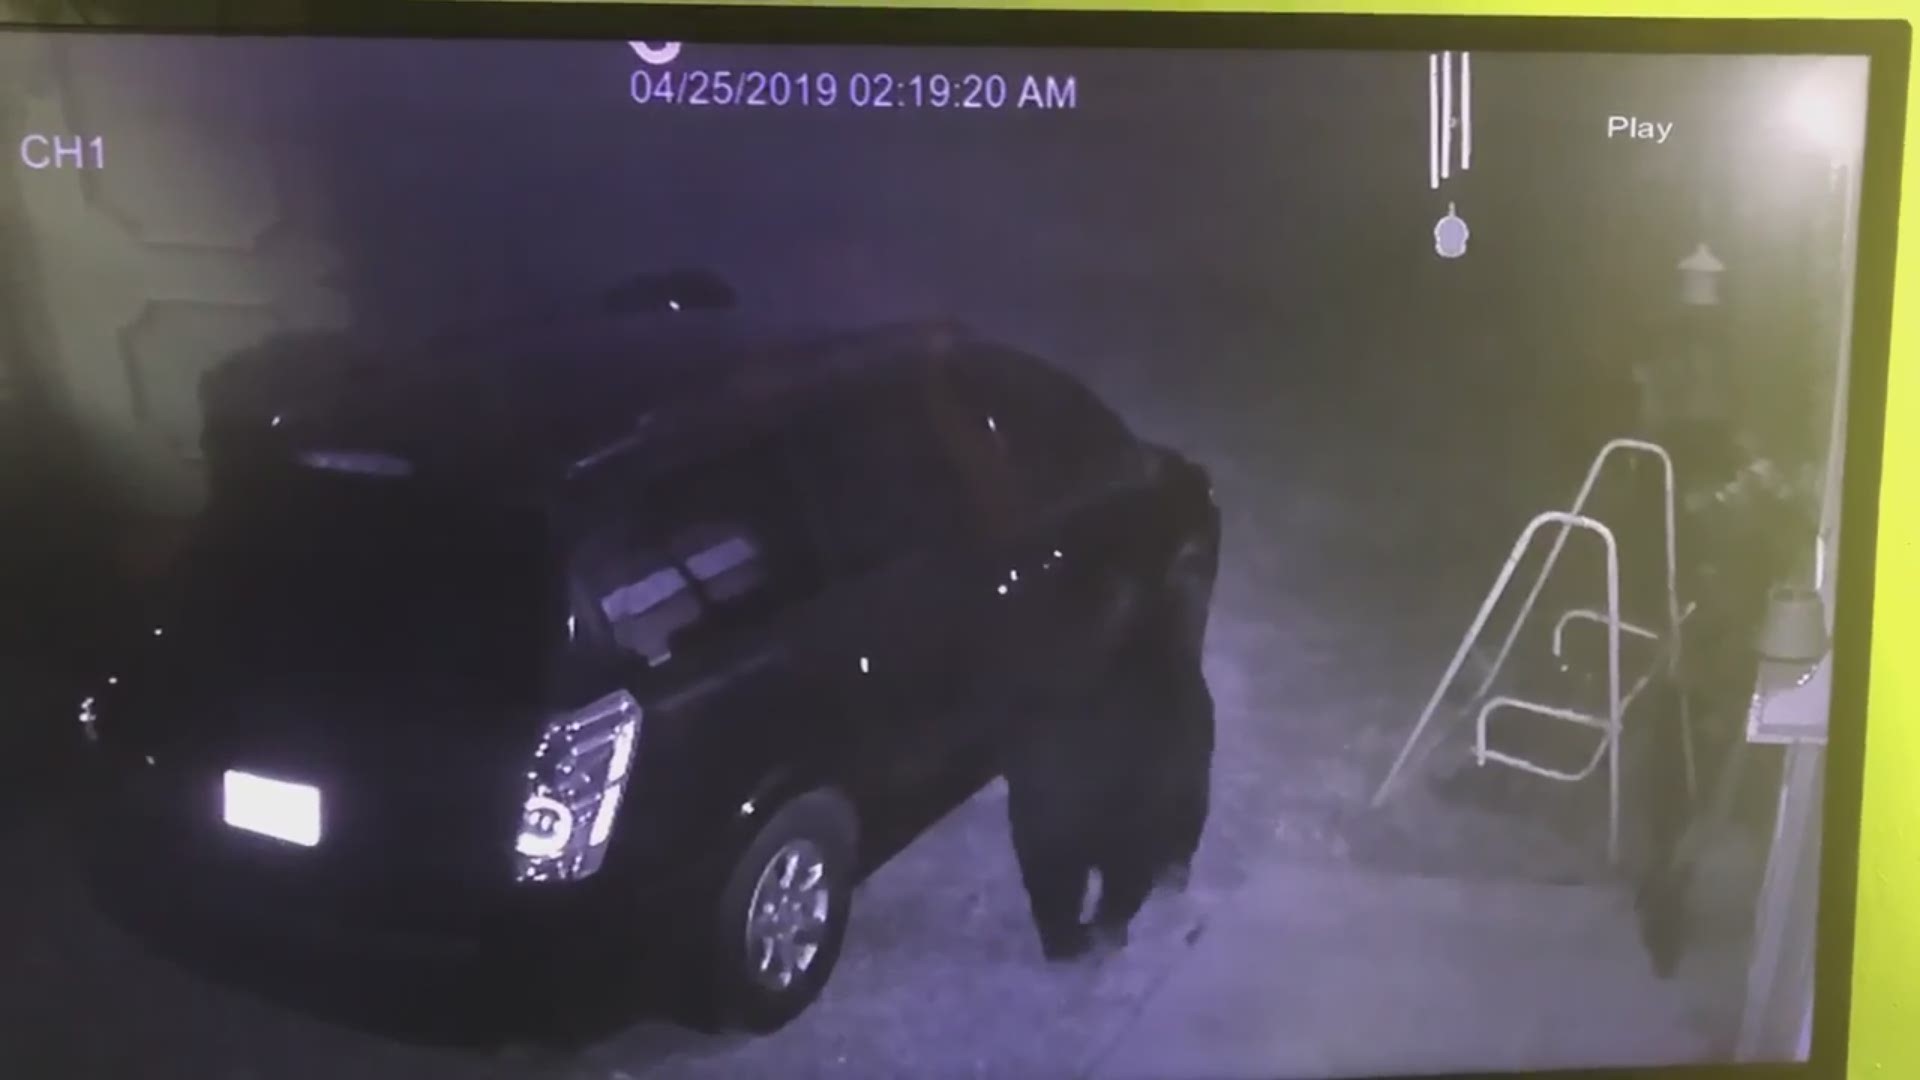 The whole thing was caught on surveillance footage that shows the bear crawl up to the car, open the door, climb right in and come out with food.